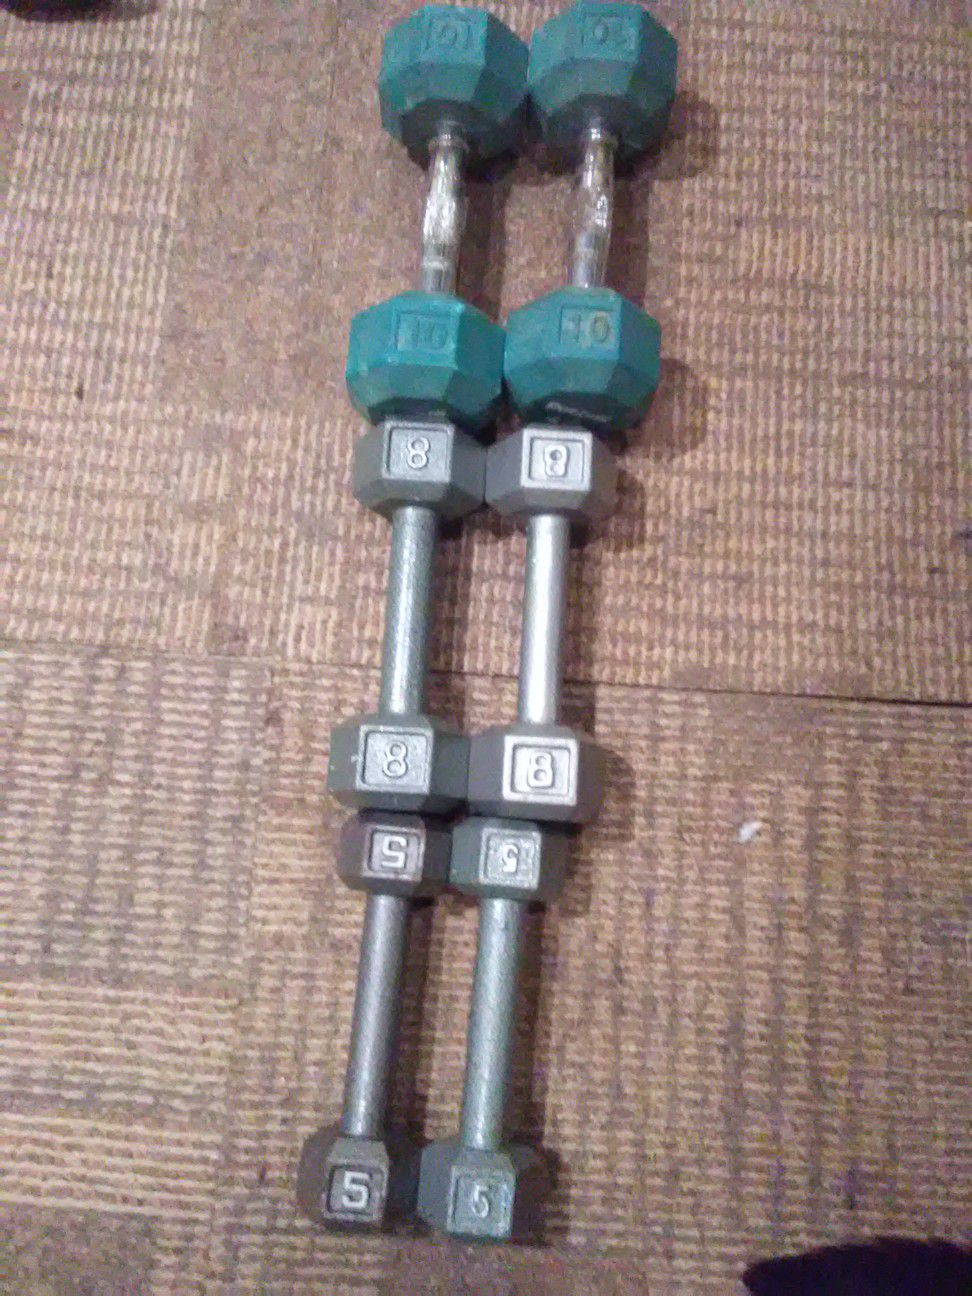 3 pairs of dumbells for sale!